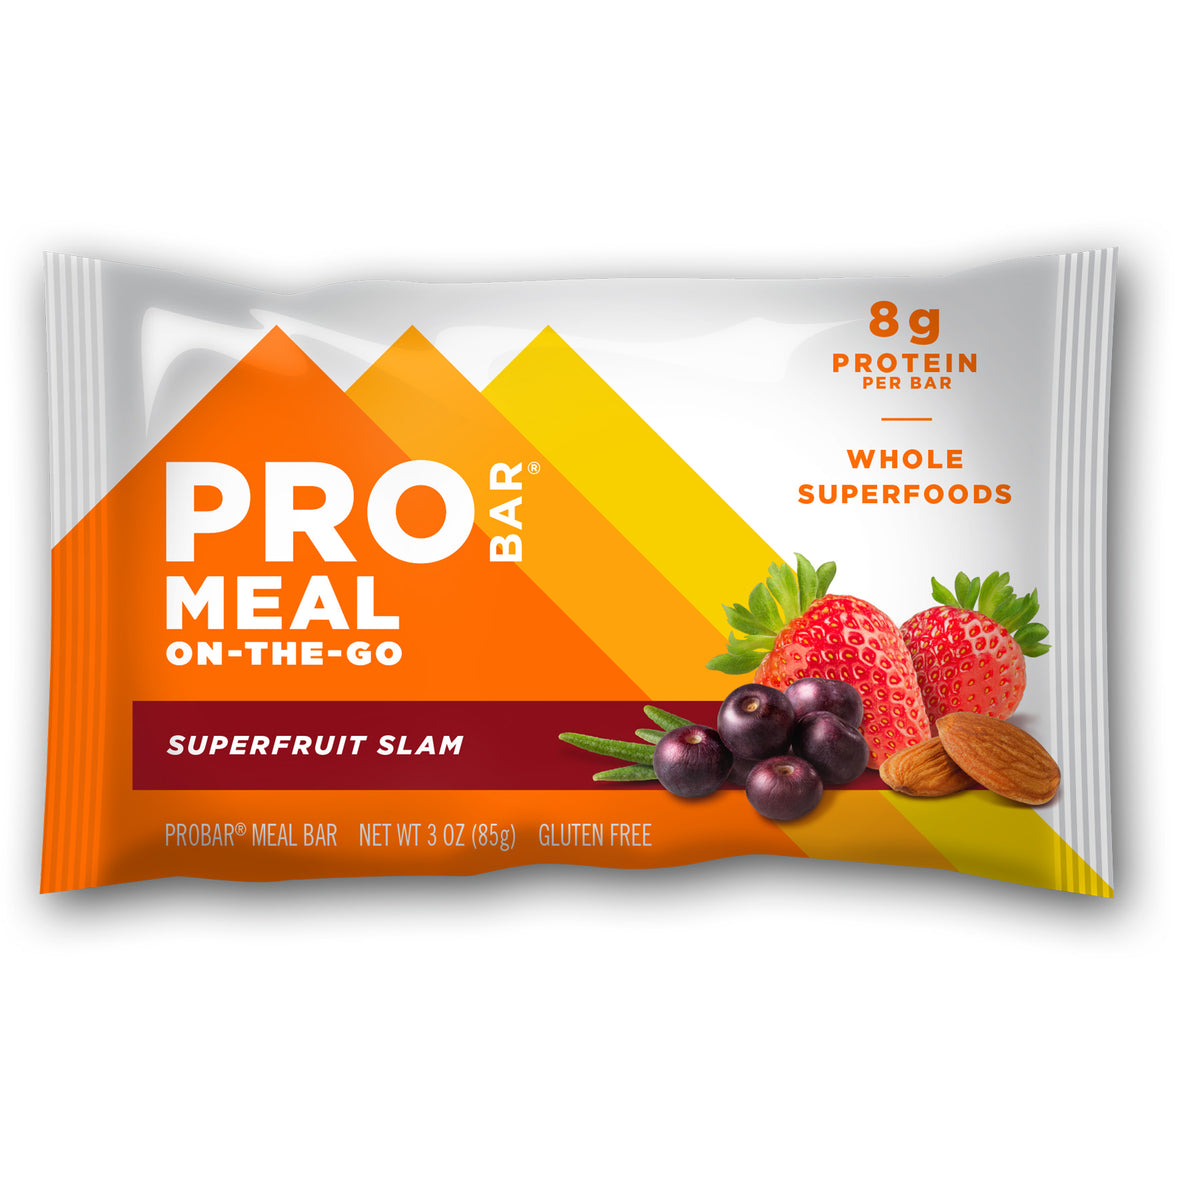 The front of the superfruit slam package